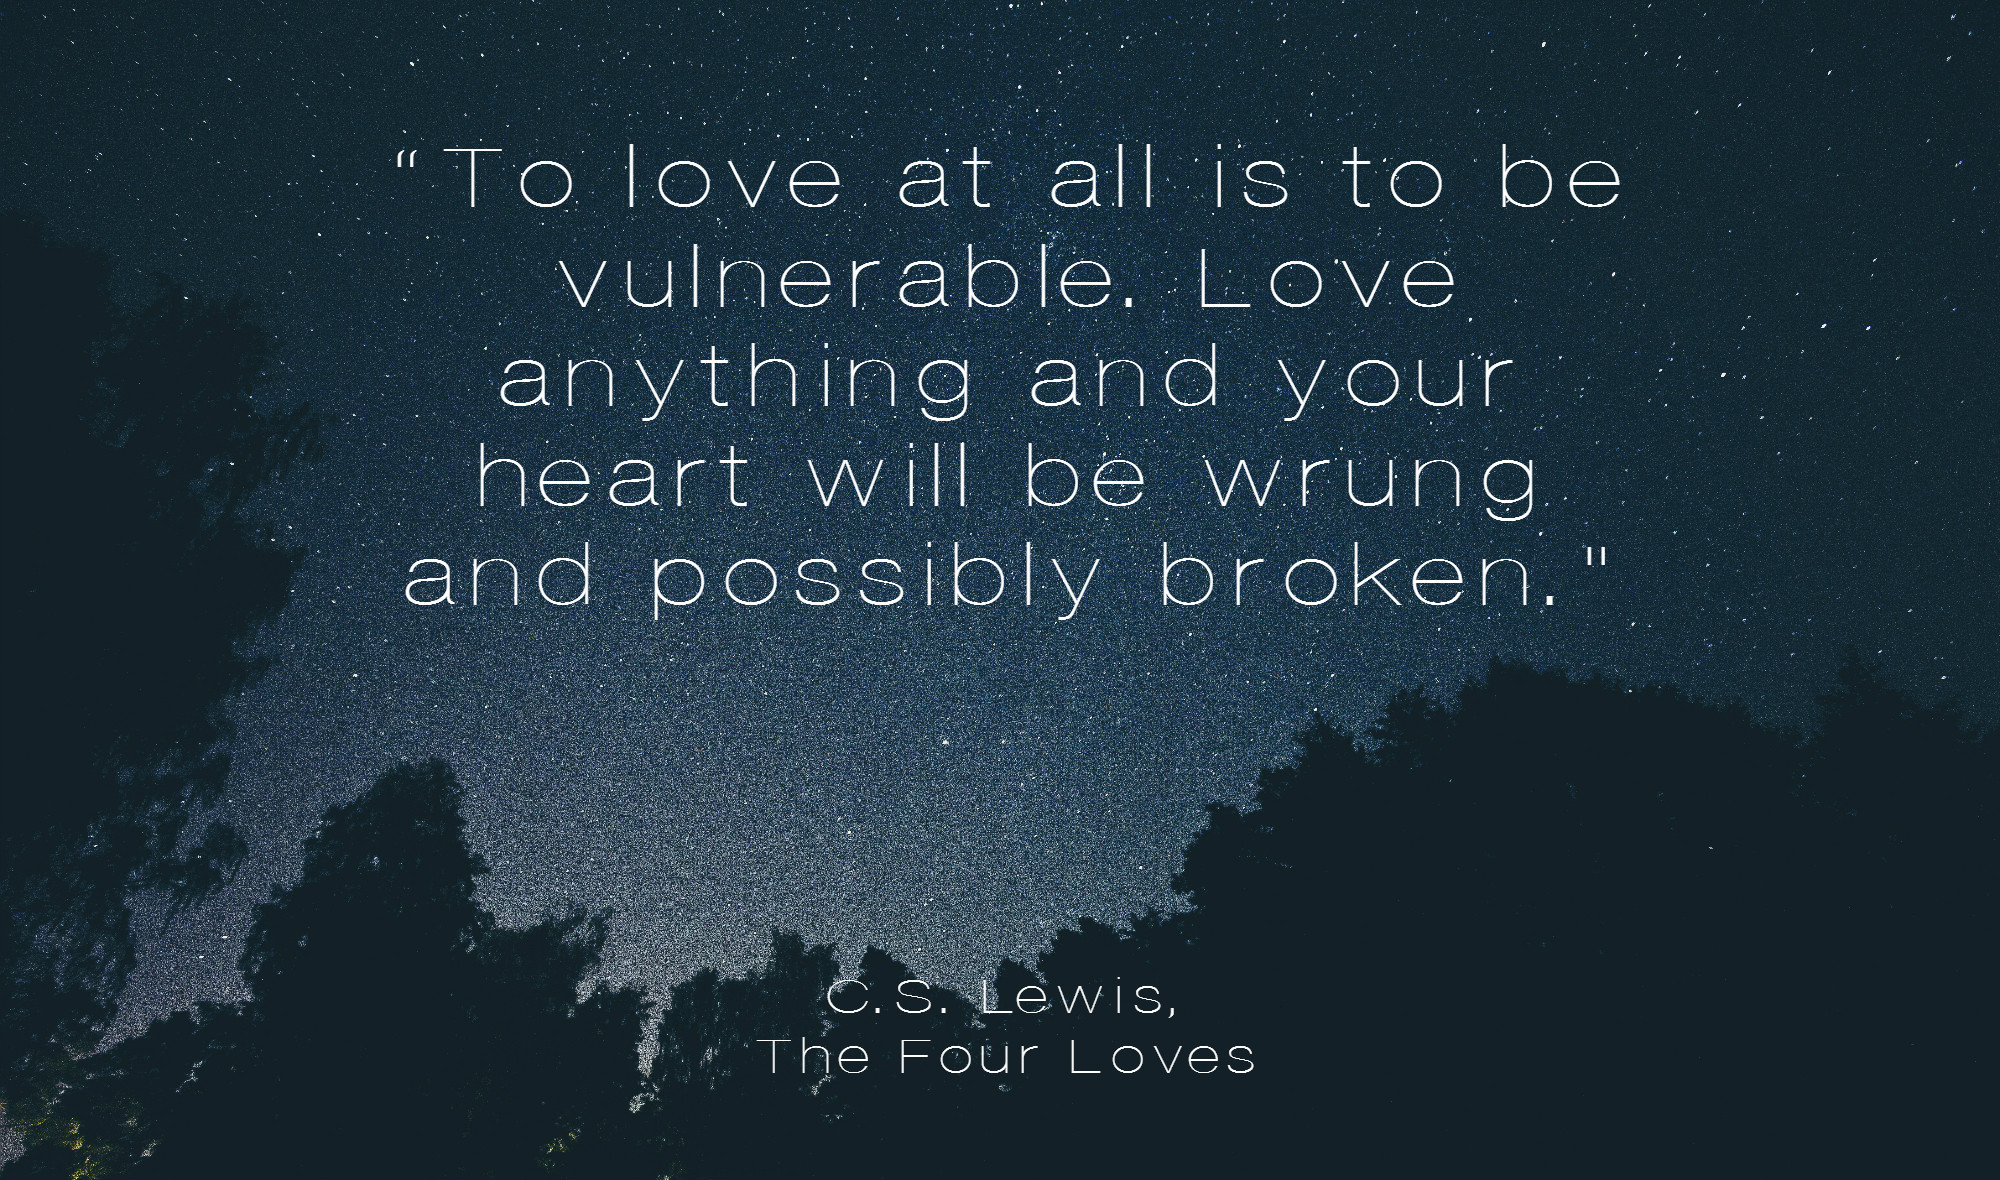 Cs Lewis The Four Loves Quotes
 My Top Ten Inspiring Quotes from Books